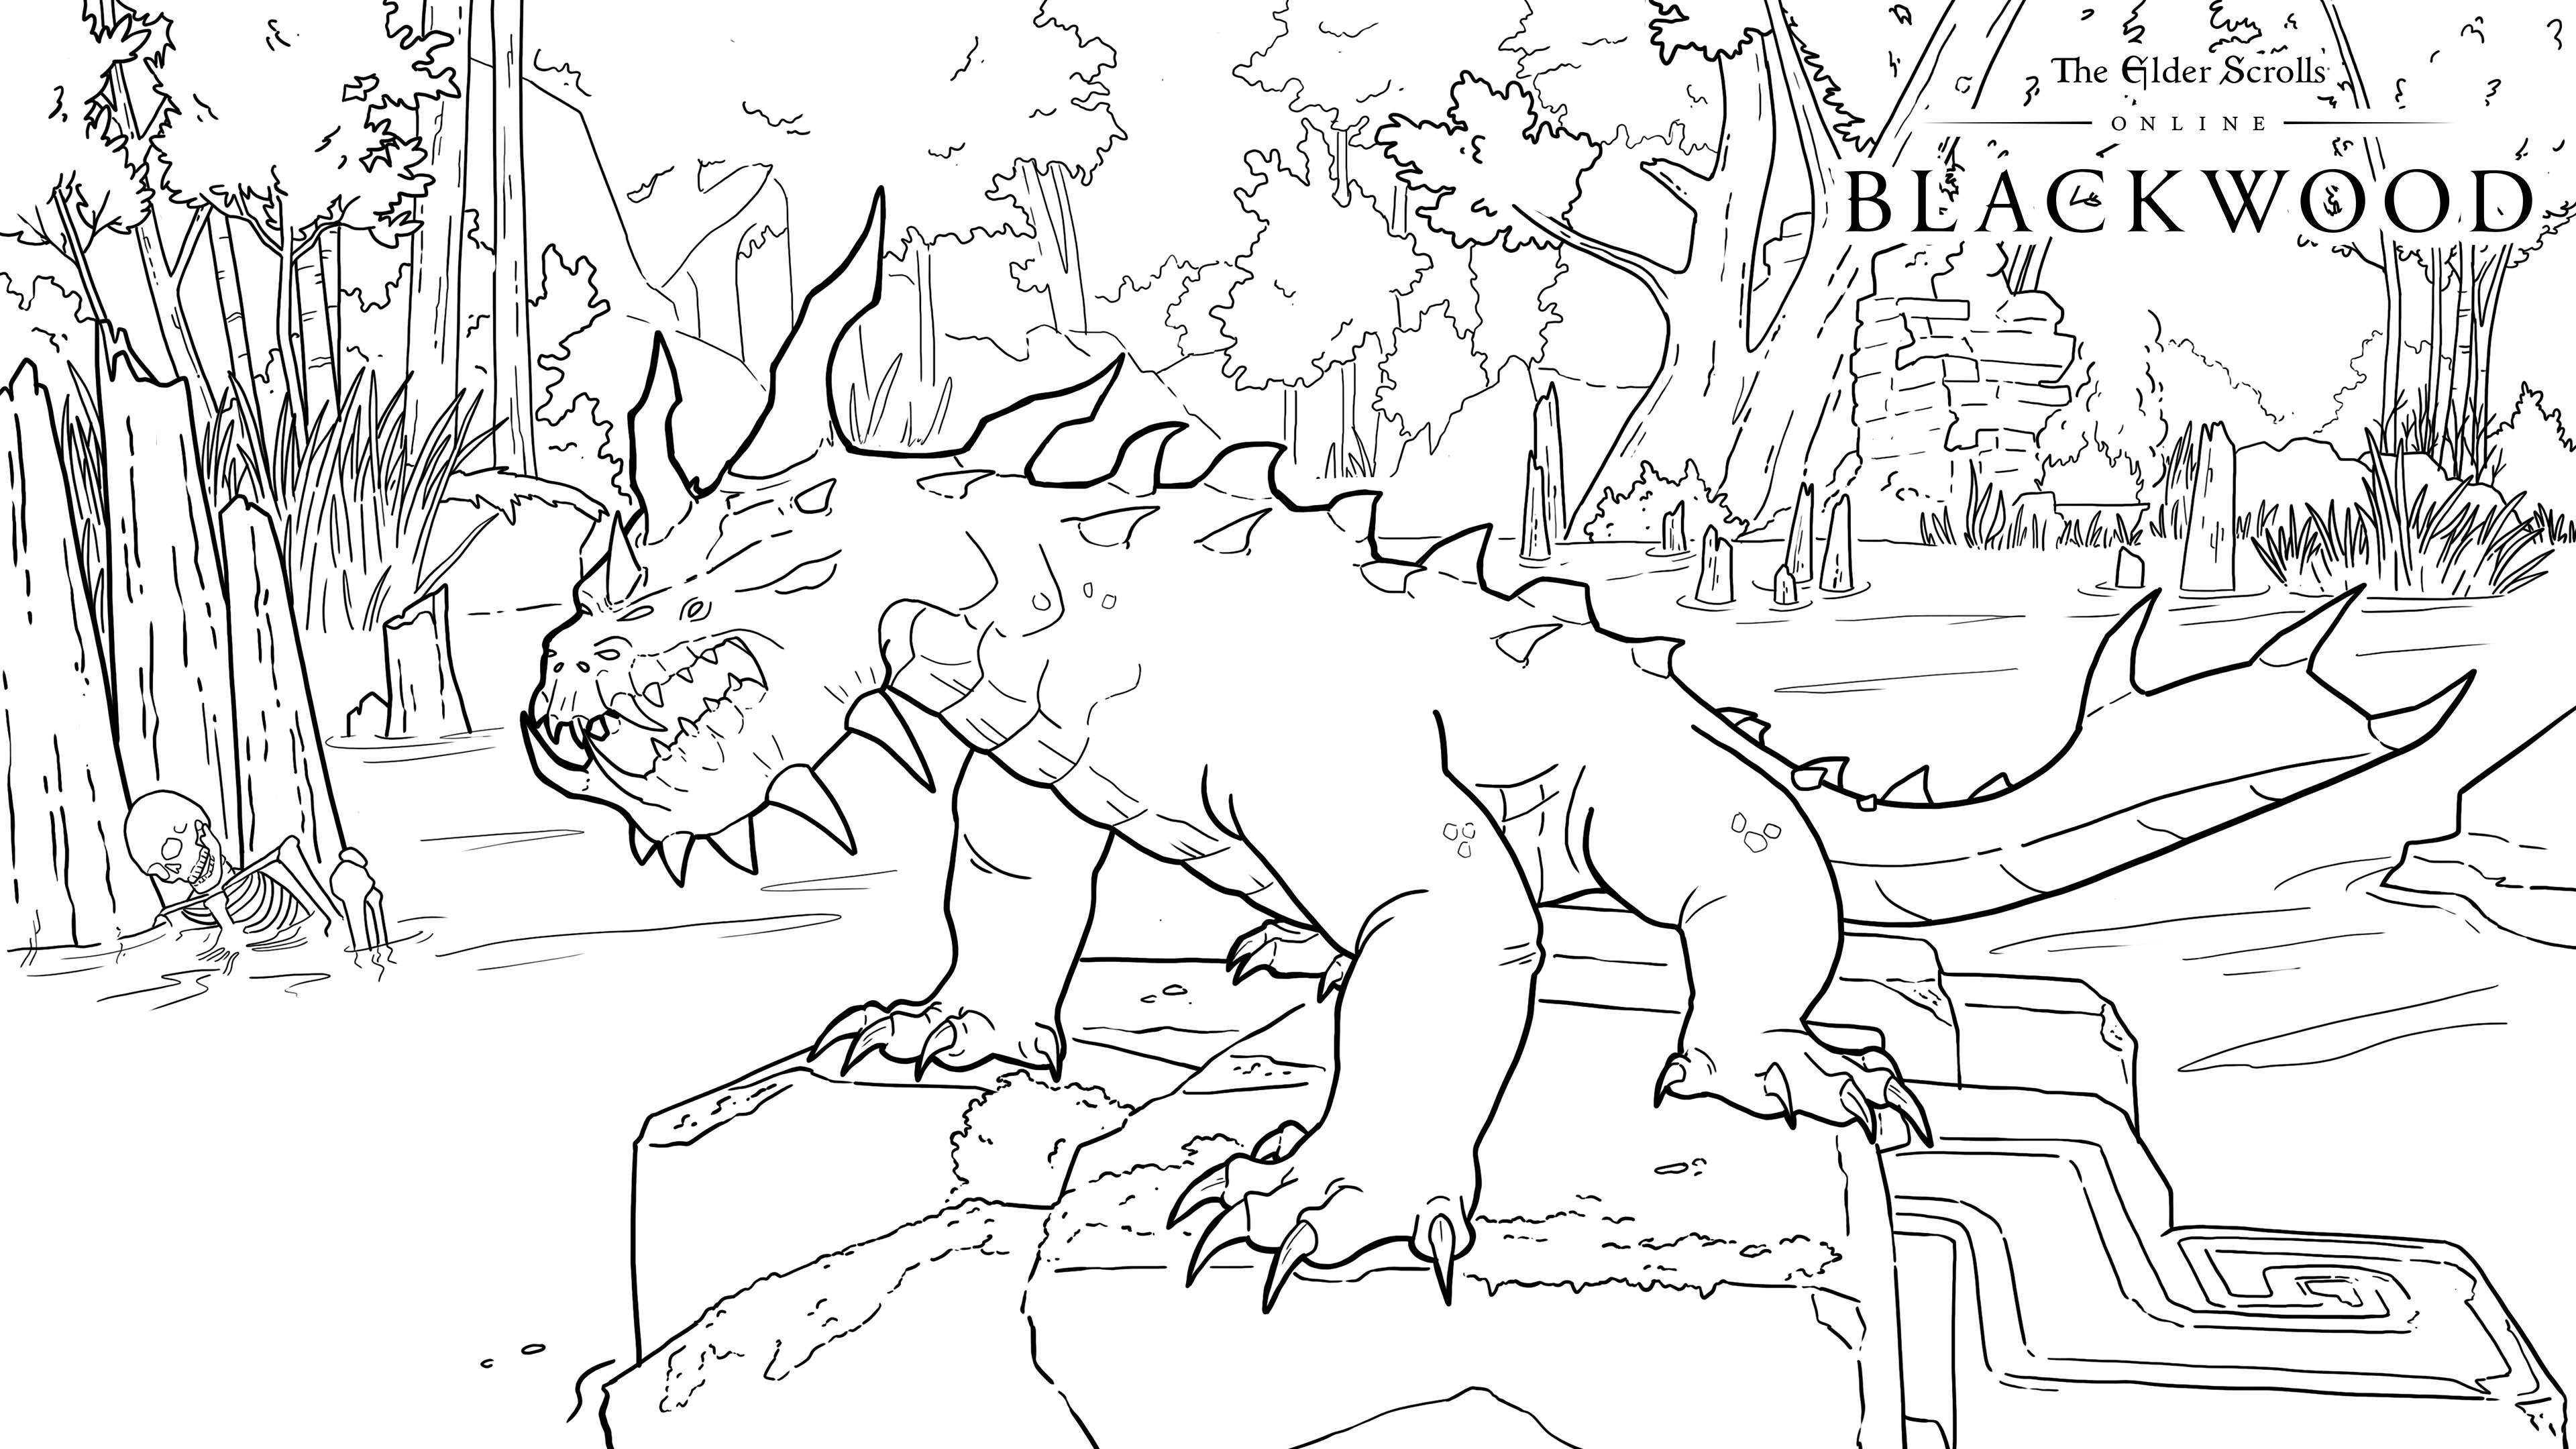 Bring Some Color to Blackwood with These New Coloring Pages - The Elder  Scrolls Online